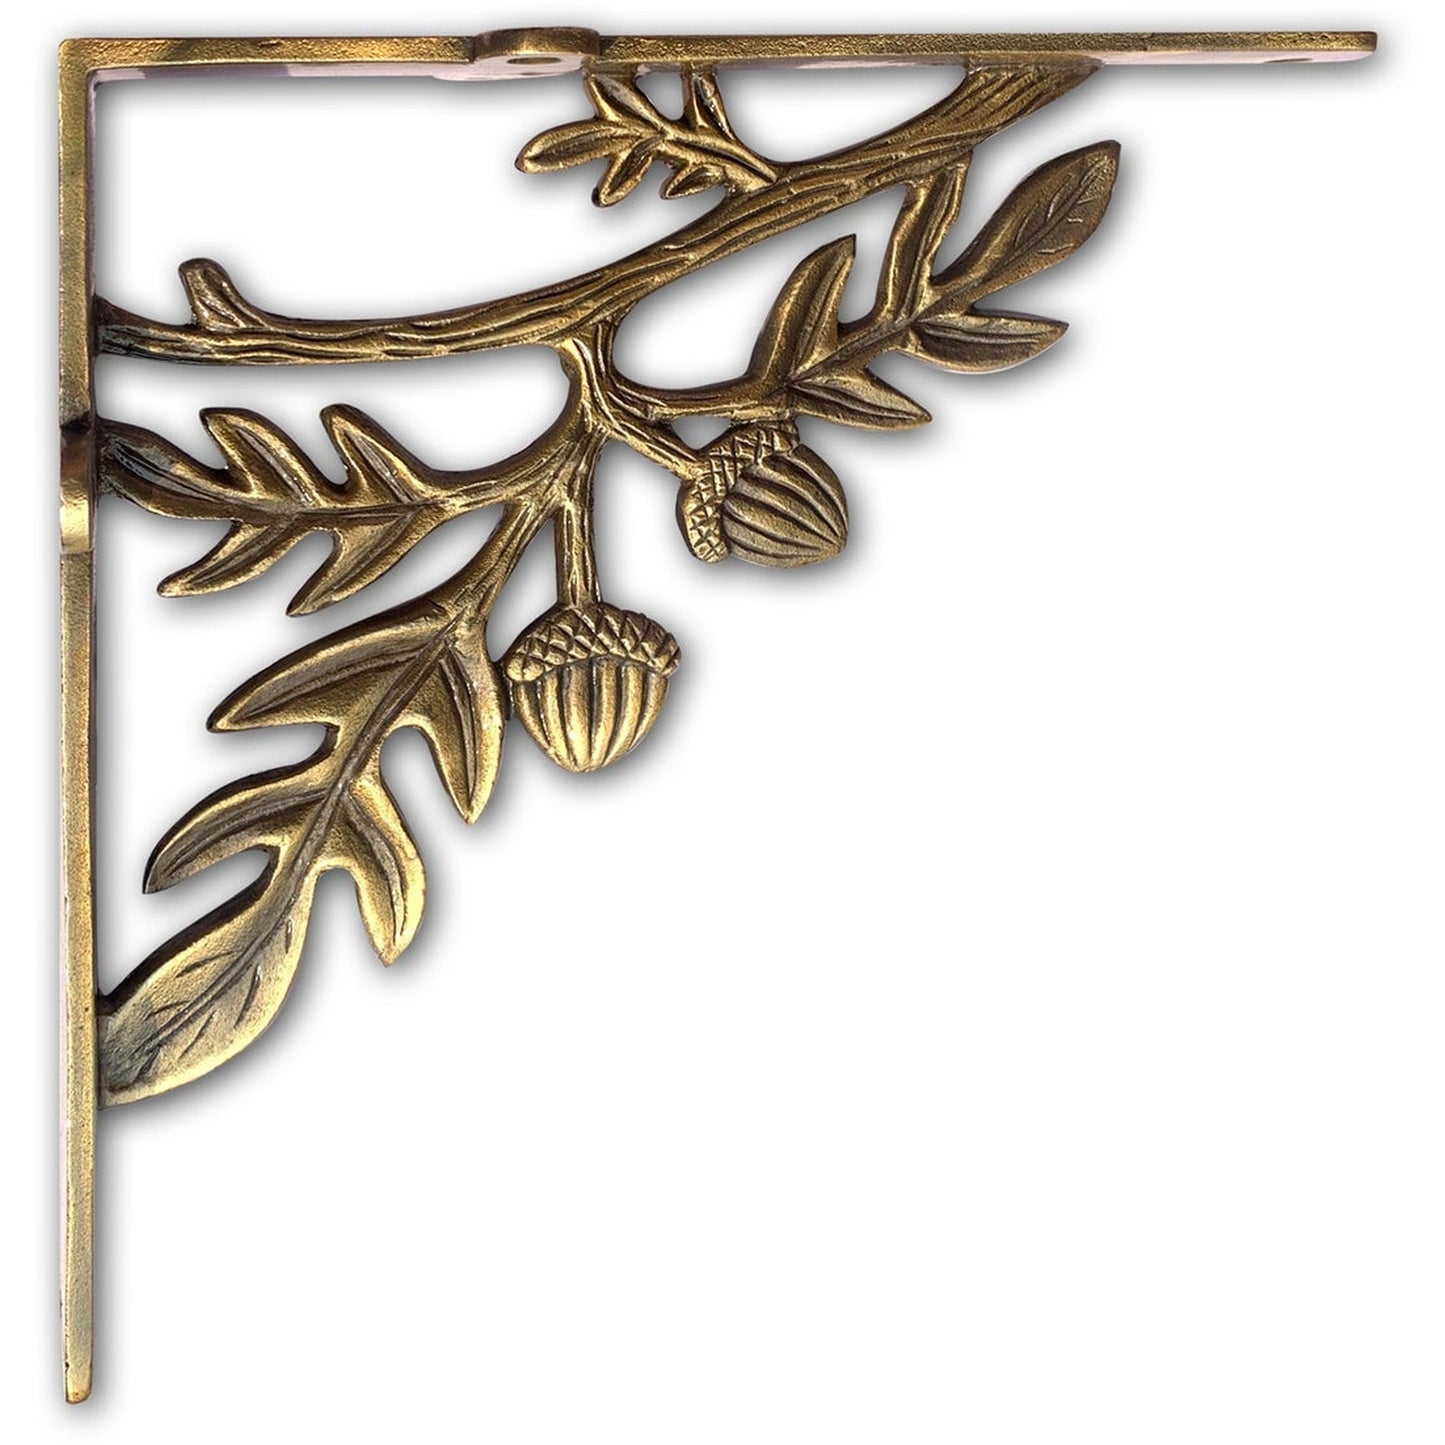 Branch & Twig Bracket, Small, Anitique Gold